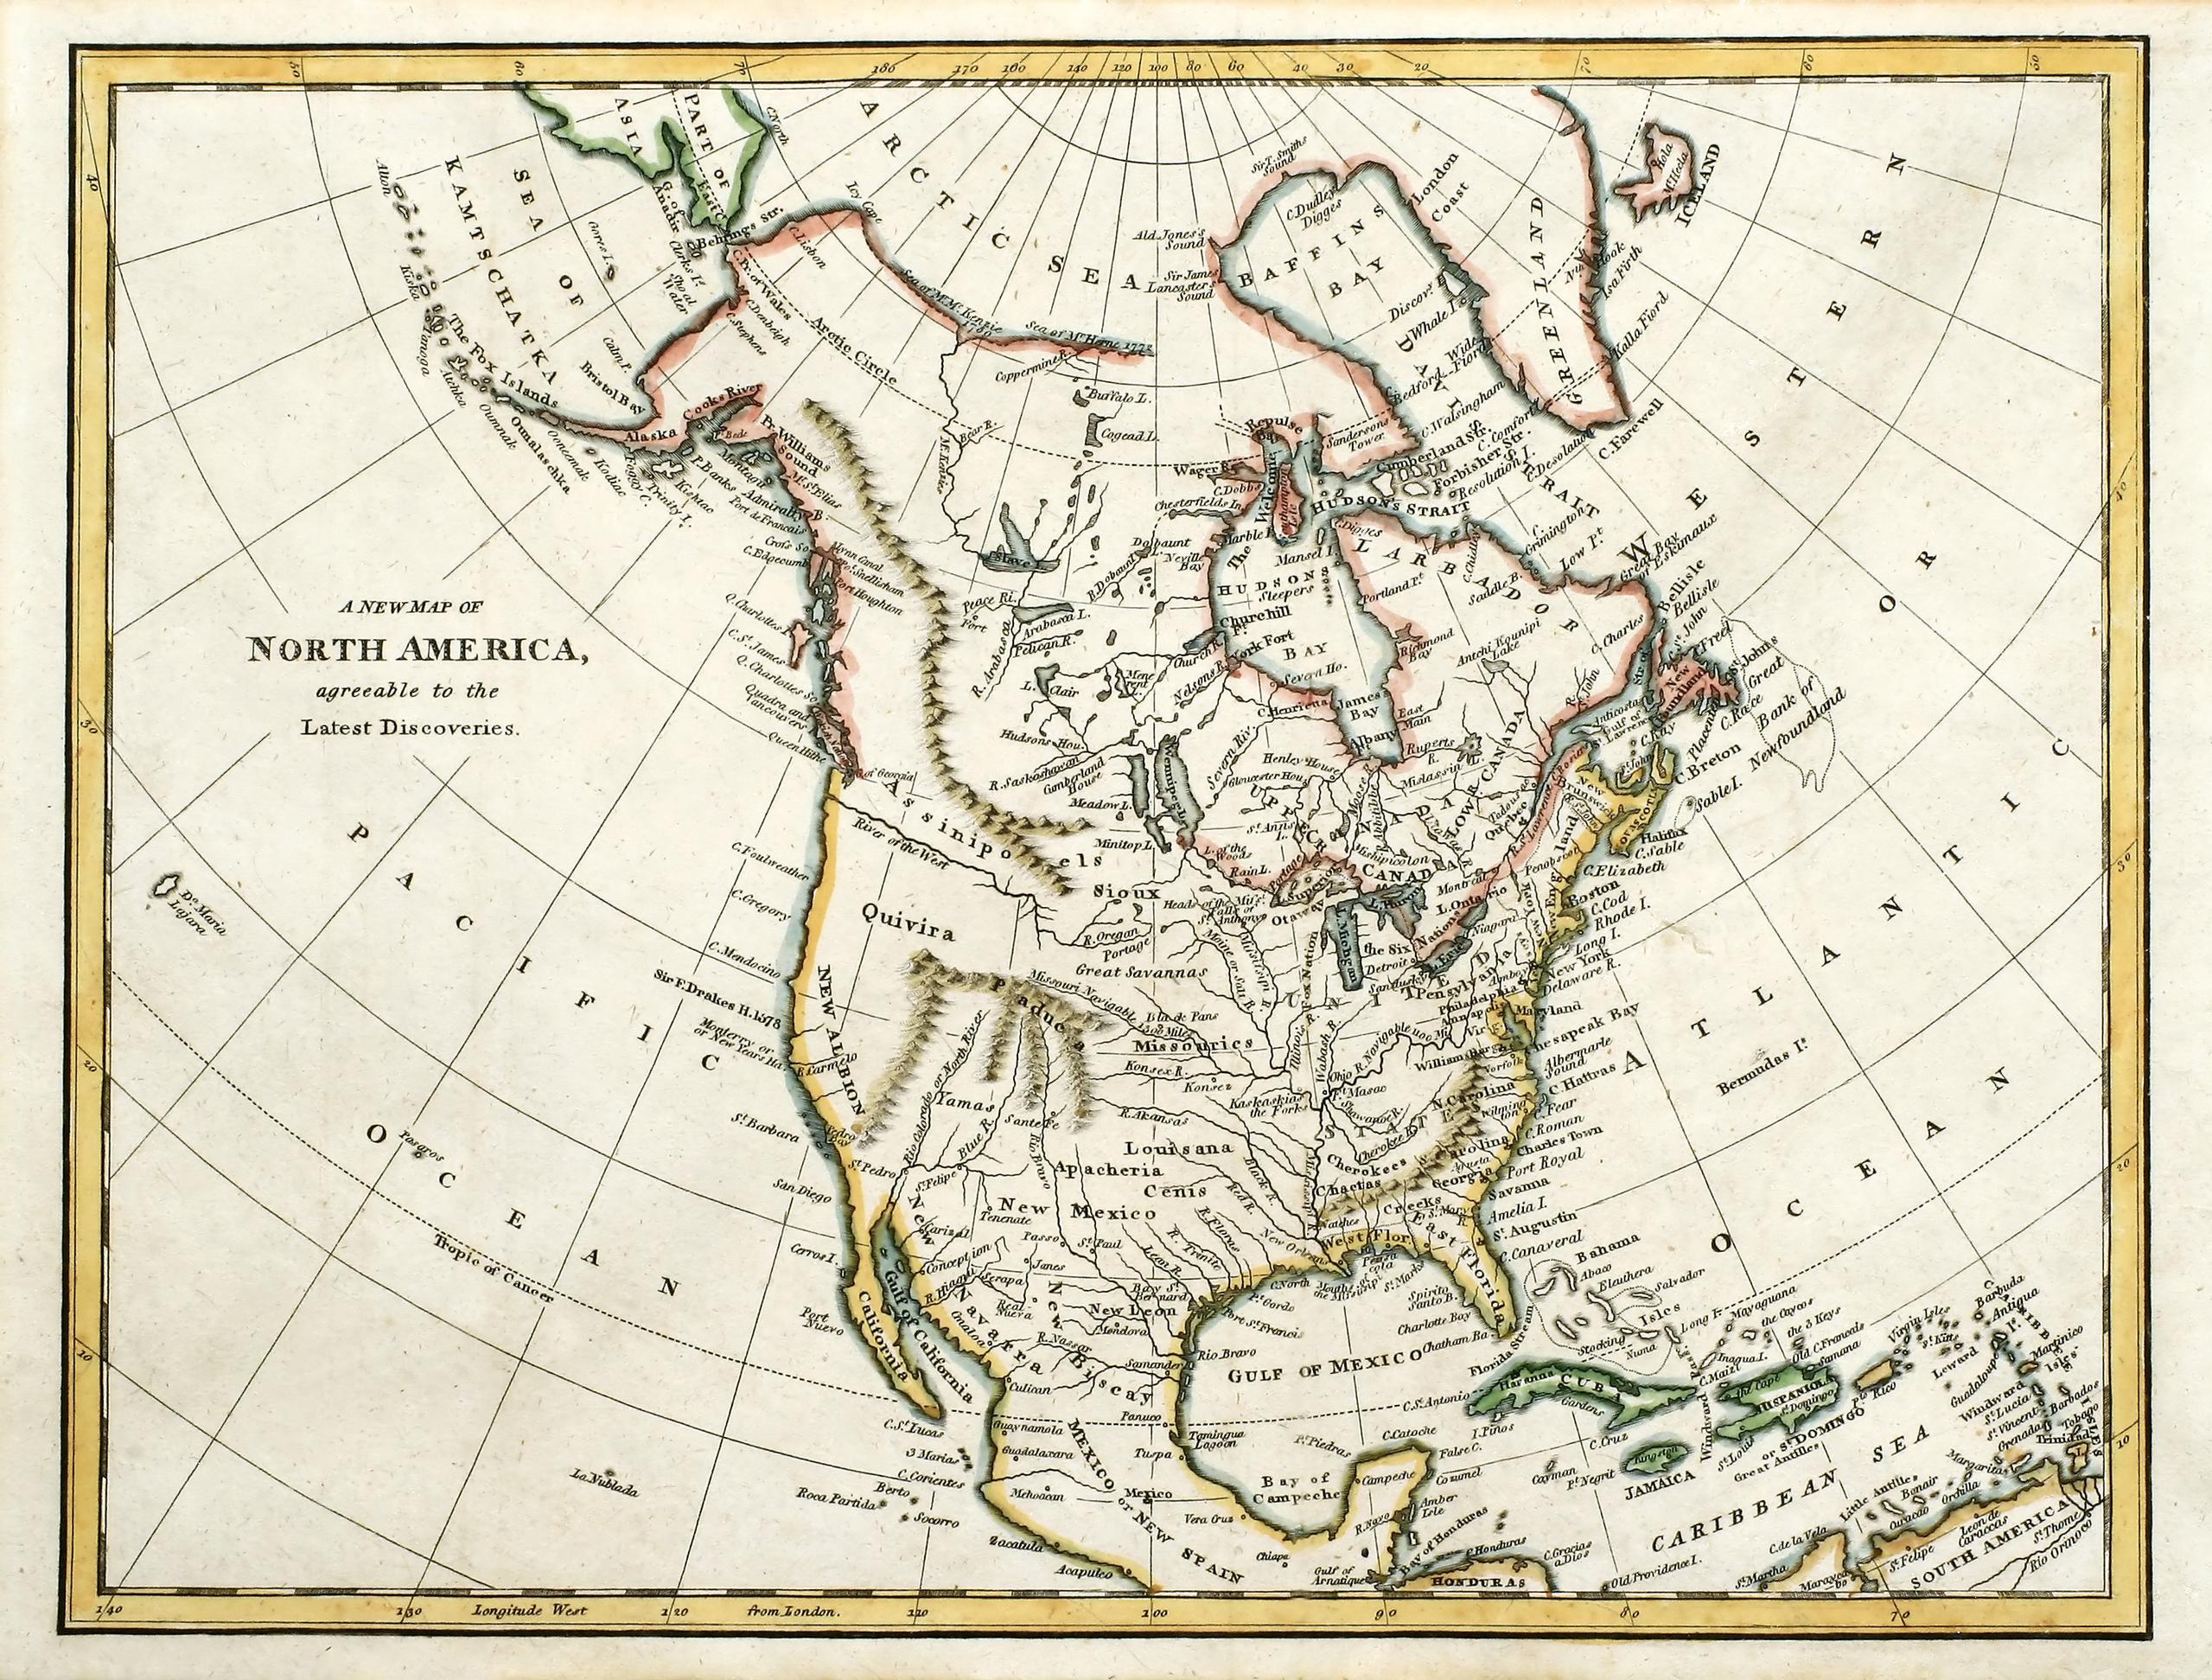 Map of North America from 1791.